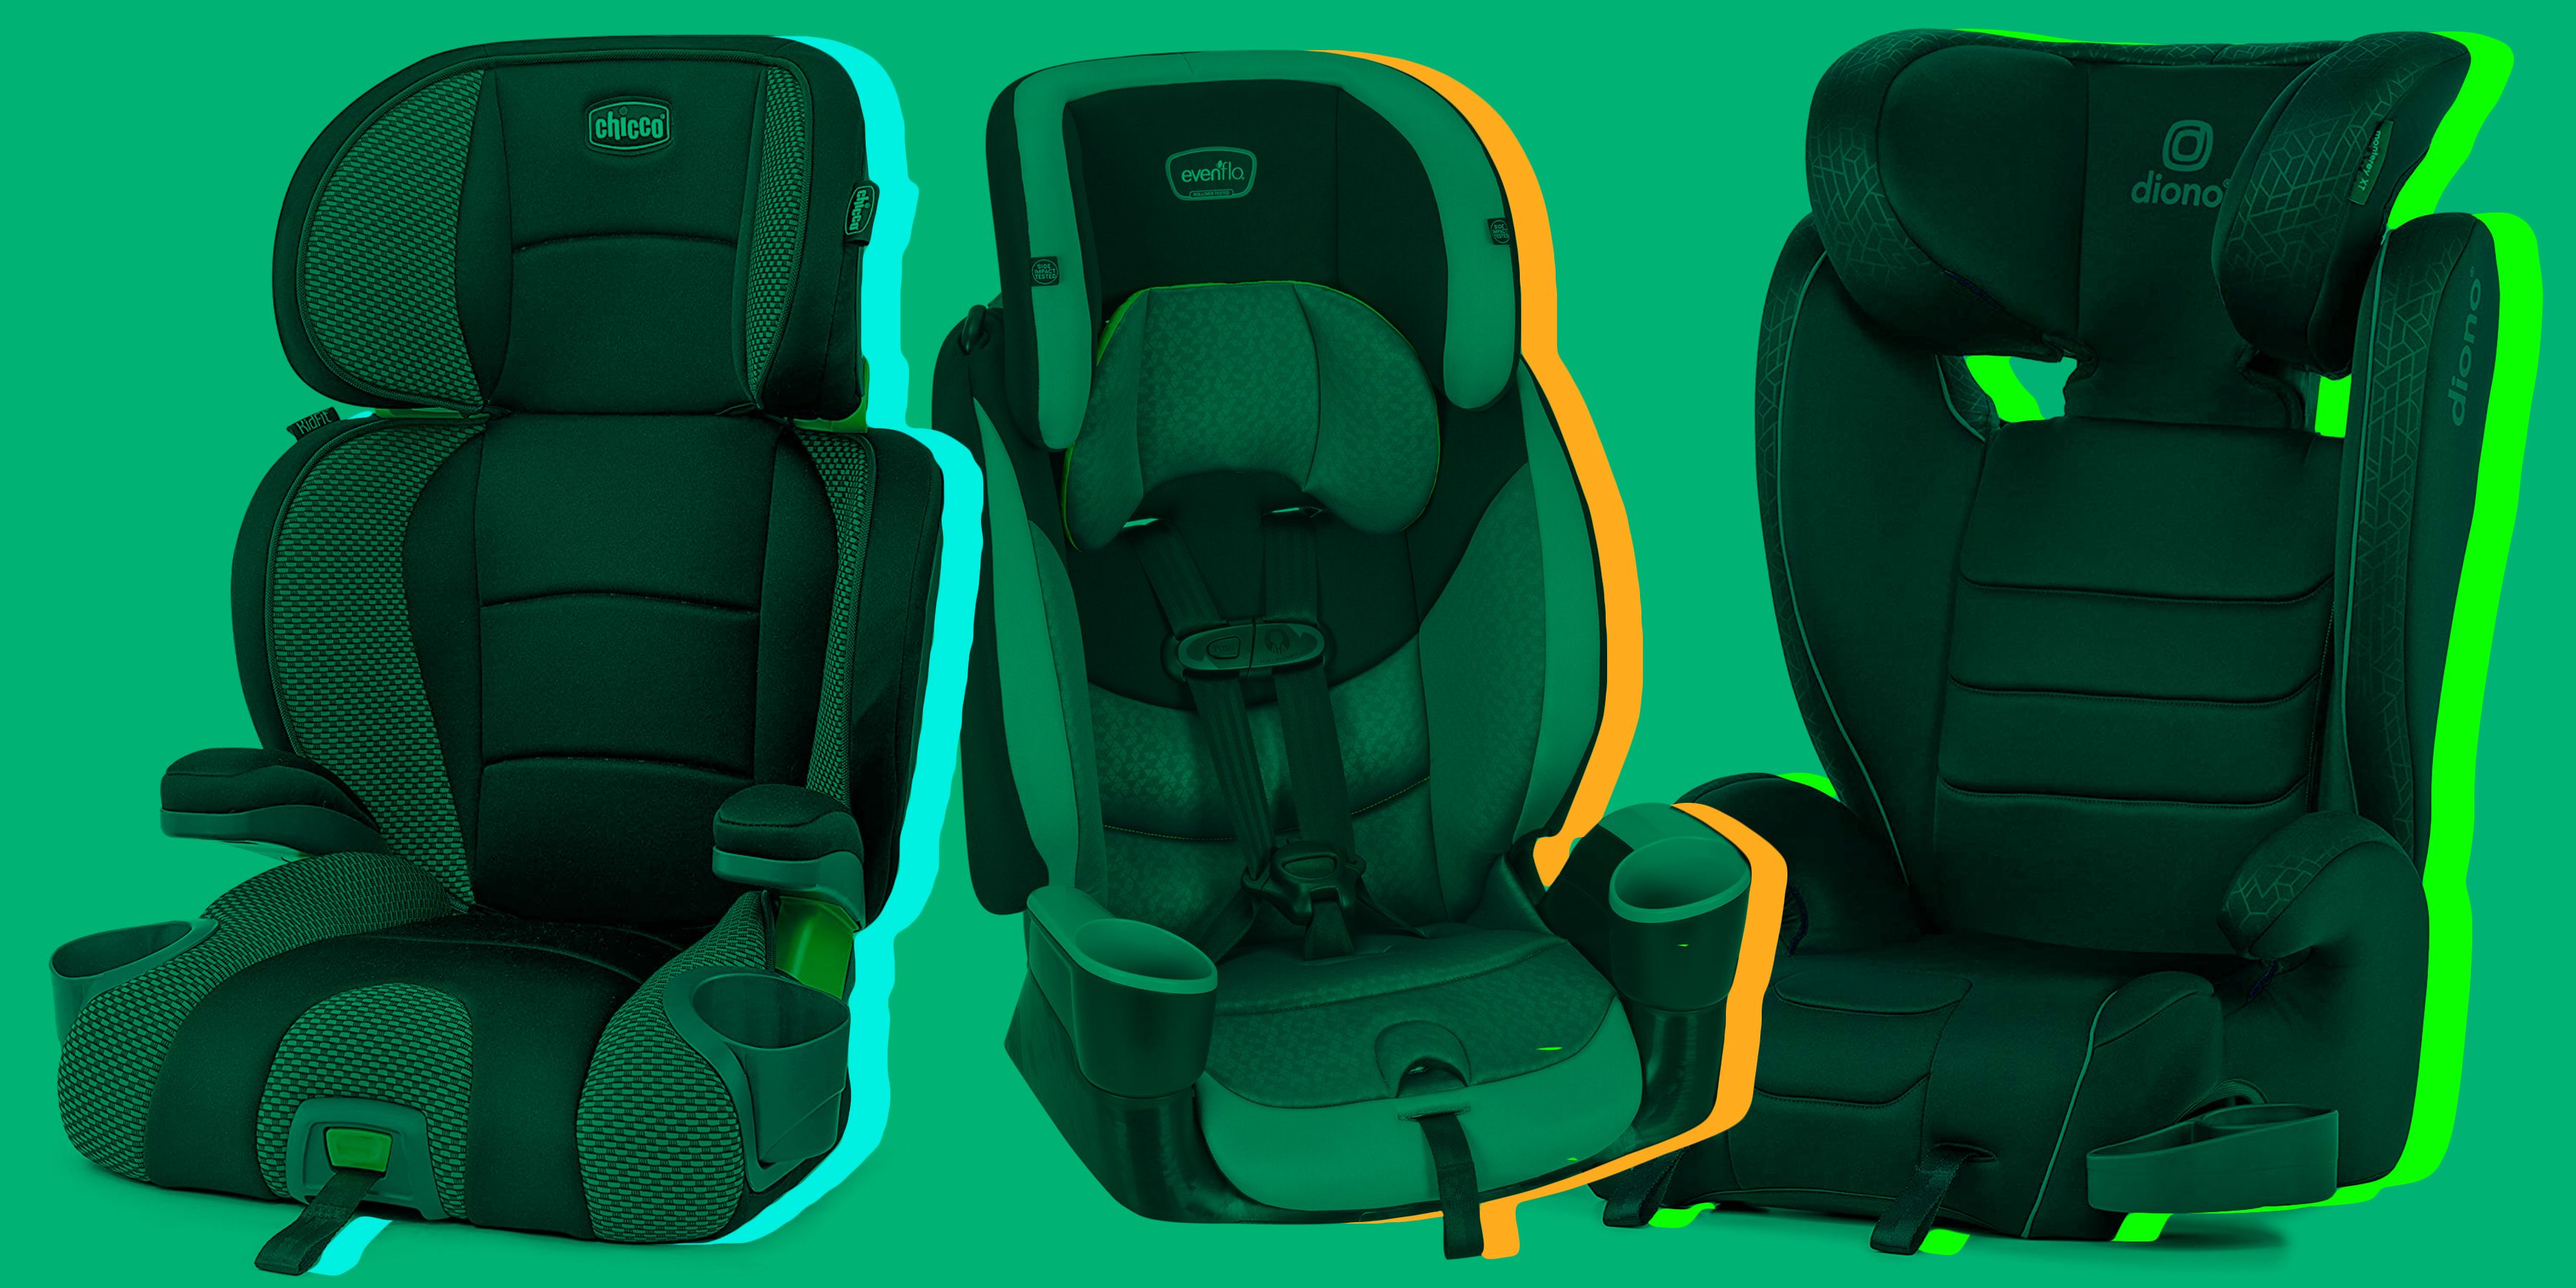 2-Inch Seat Booster Cushion